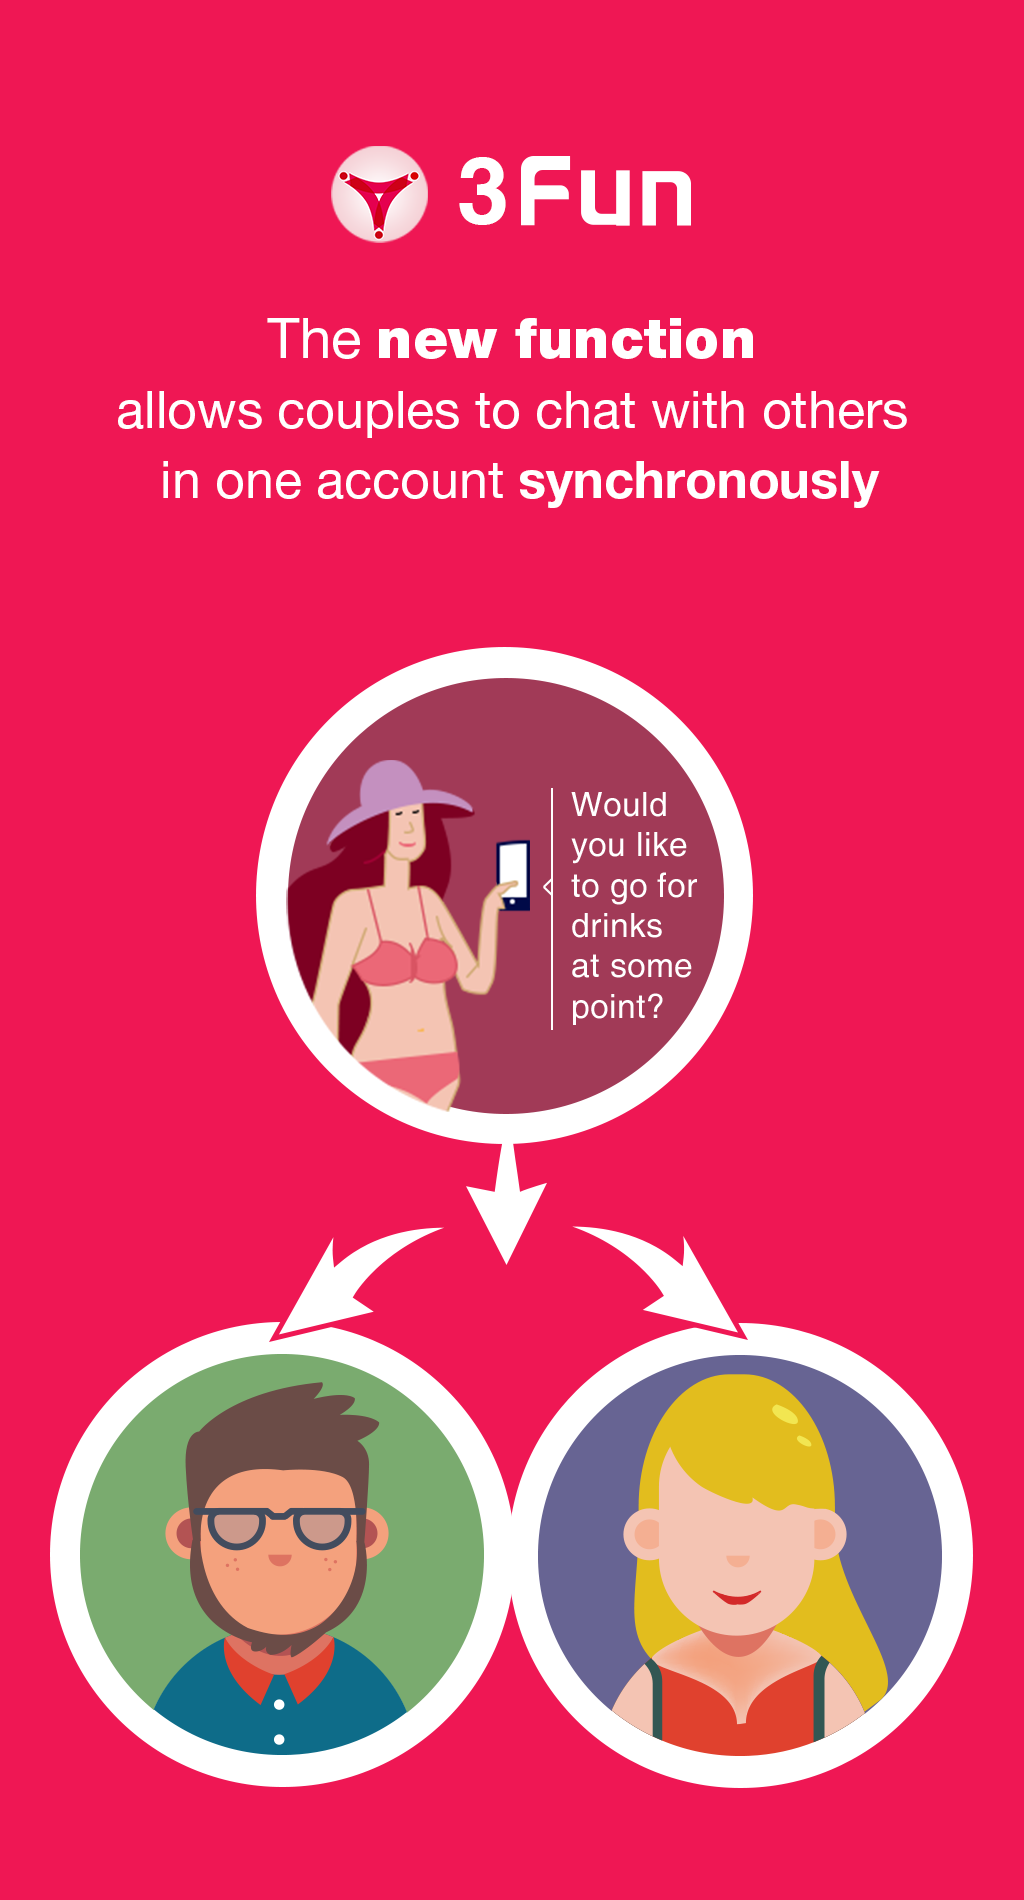 Threesome App "3Fun" Now Lets Couples Chat Synchronously from One